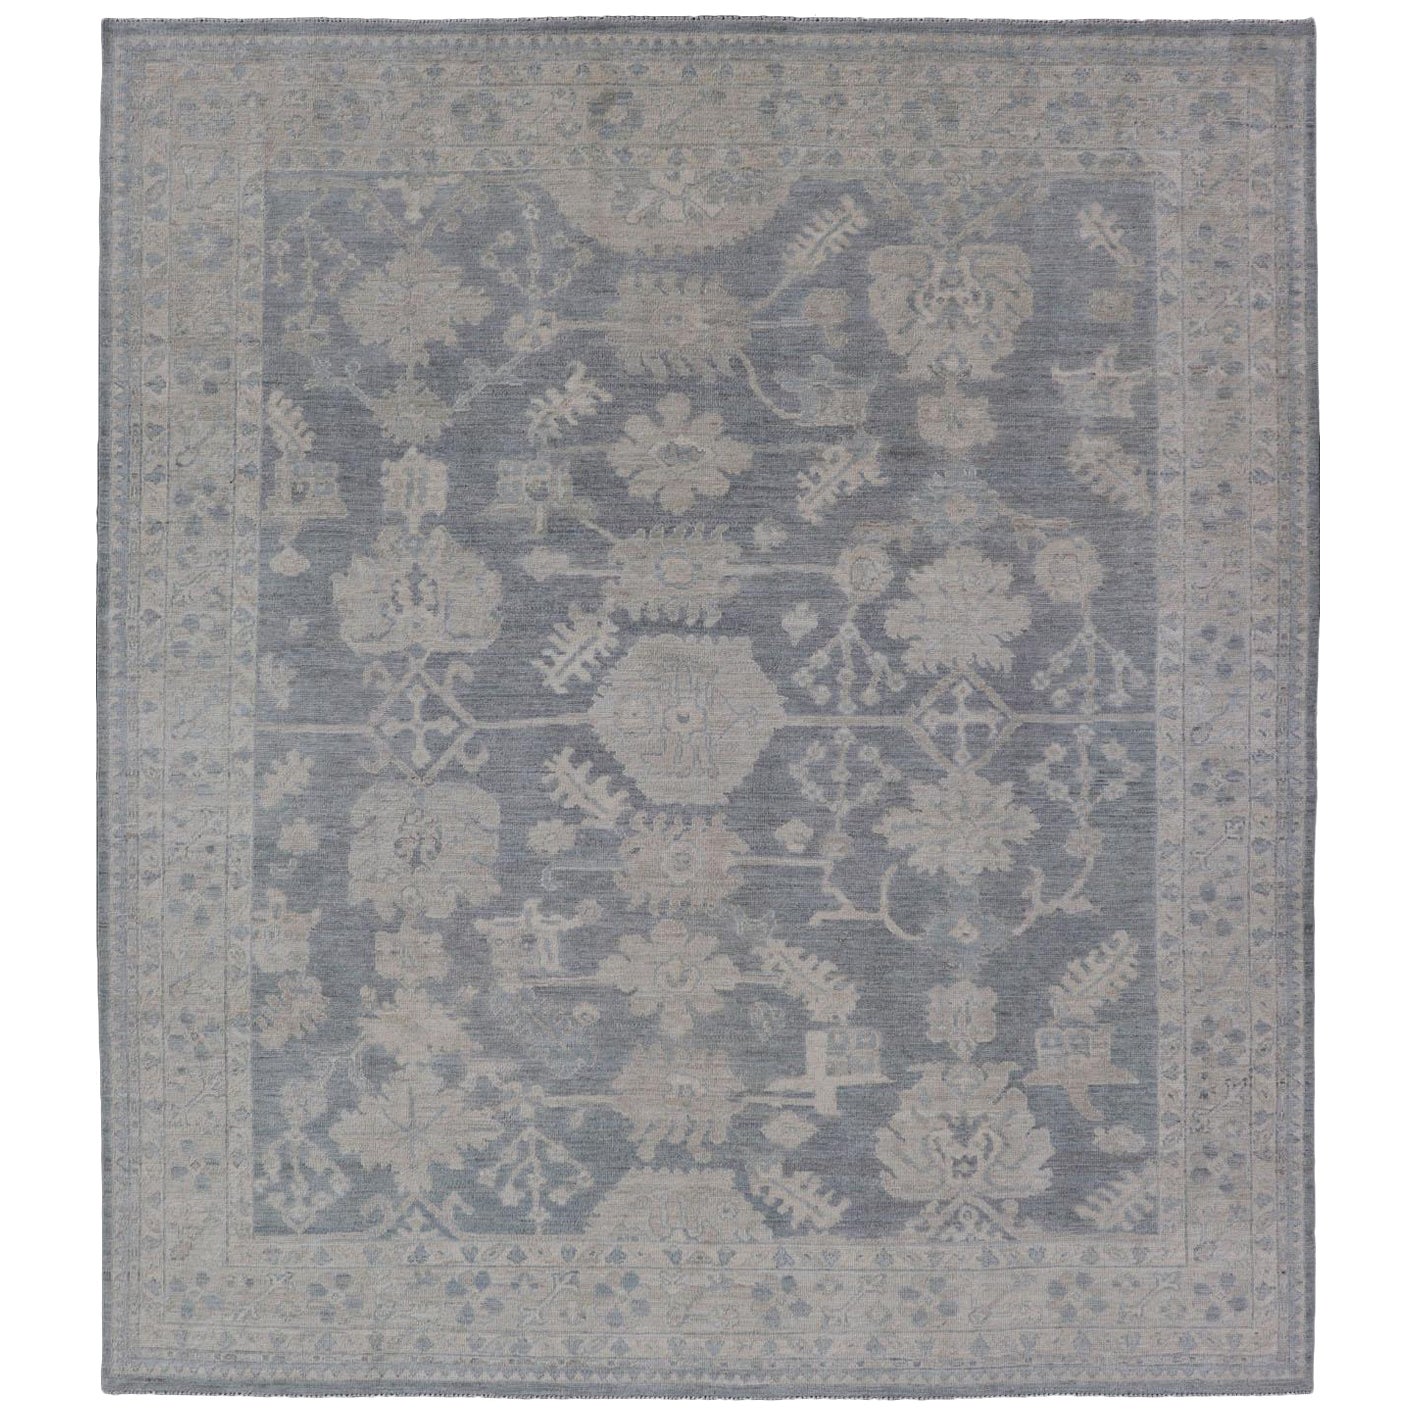 Modern Oushak with Large Floral Motifs with Cream, Blue, and Steel Blue